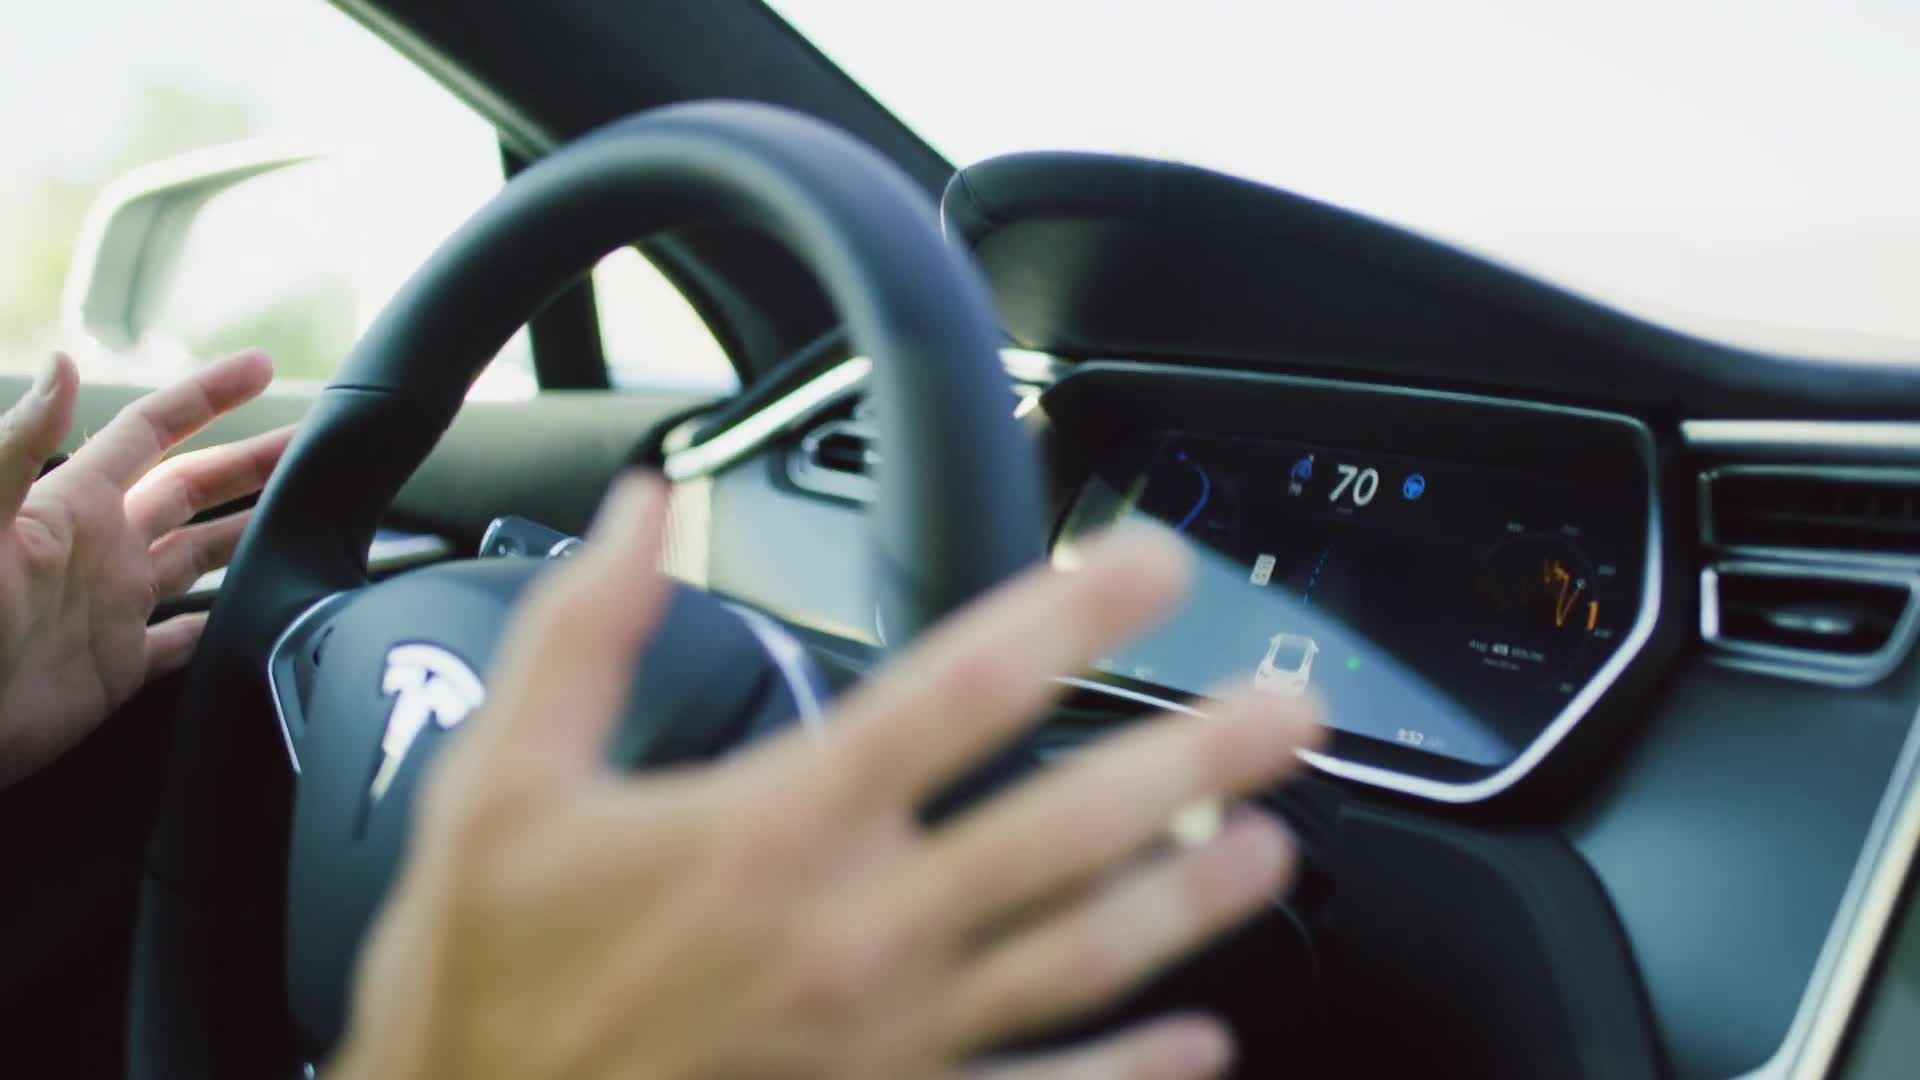 6 Car Safety Features That Can Keep You Out Of Trouble